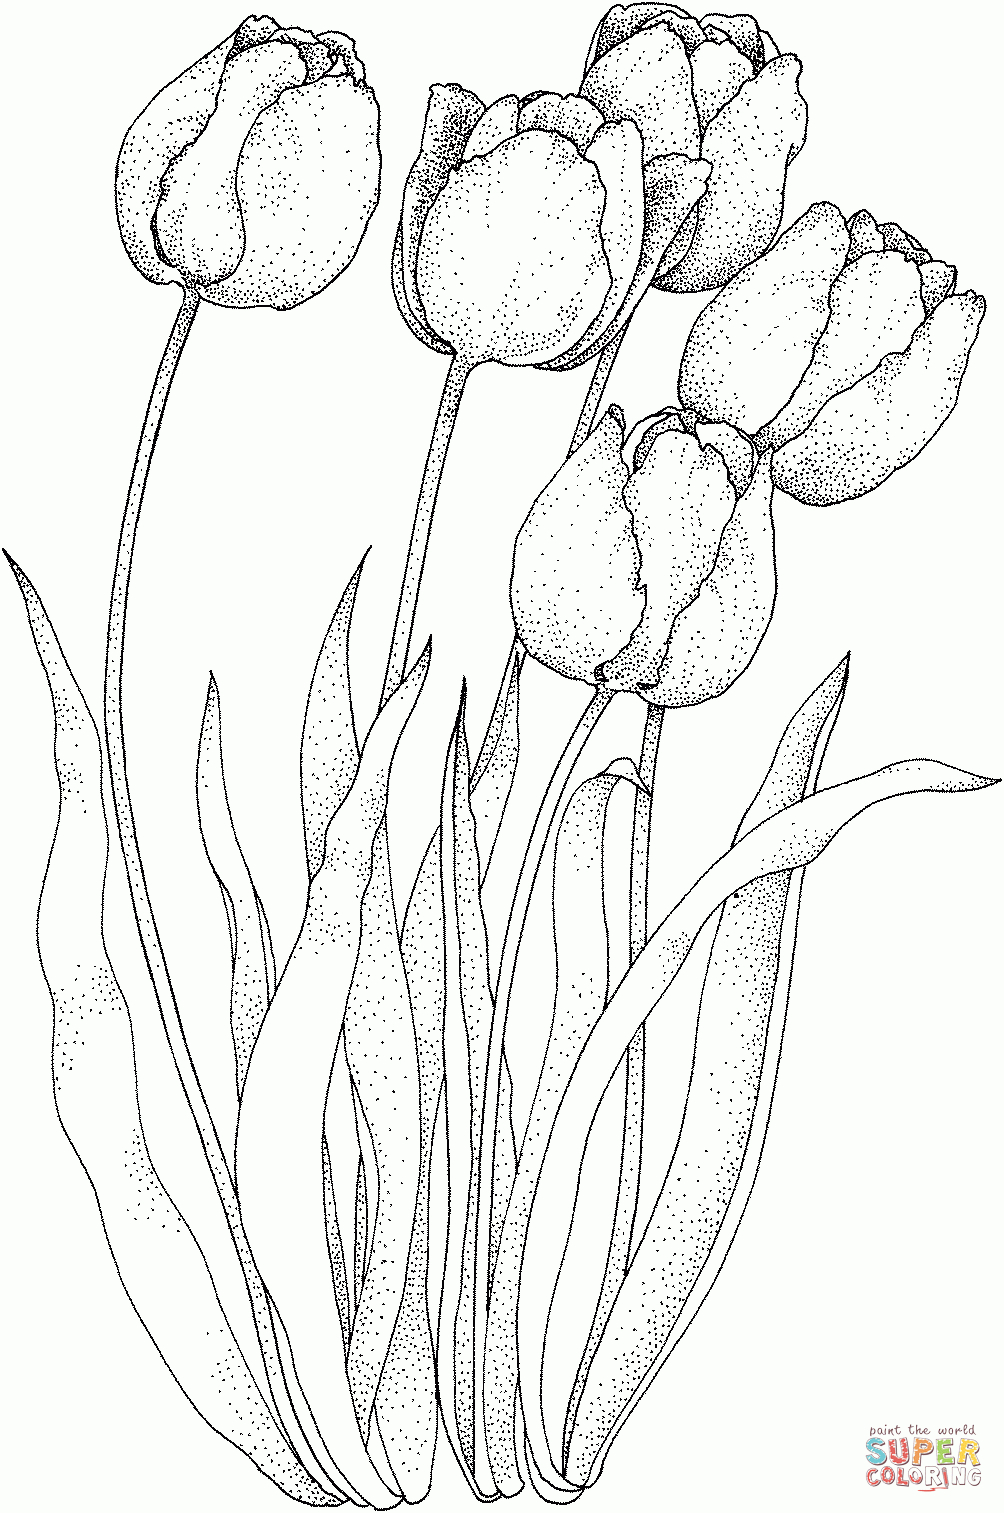 Four Tulips Coloring Page | Free Printable Coloring Pages - Free Printable Tulip Coloring Pages